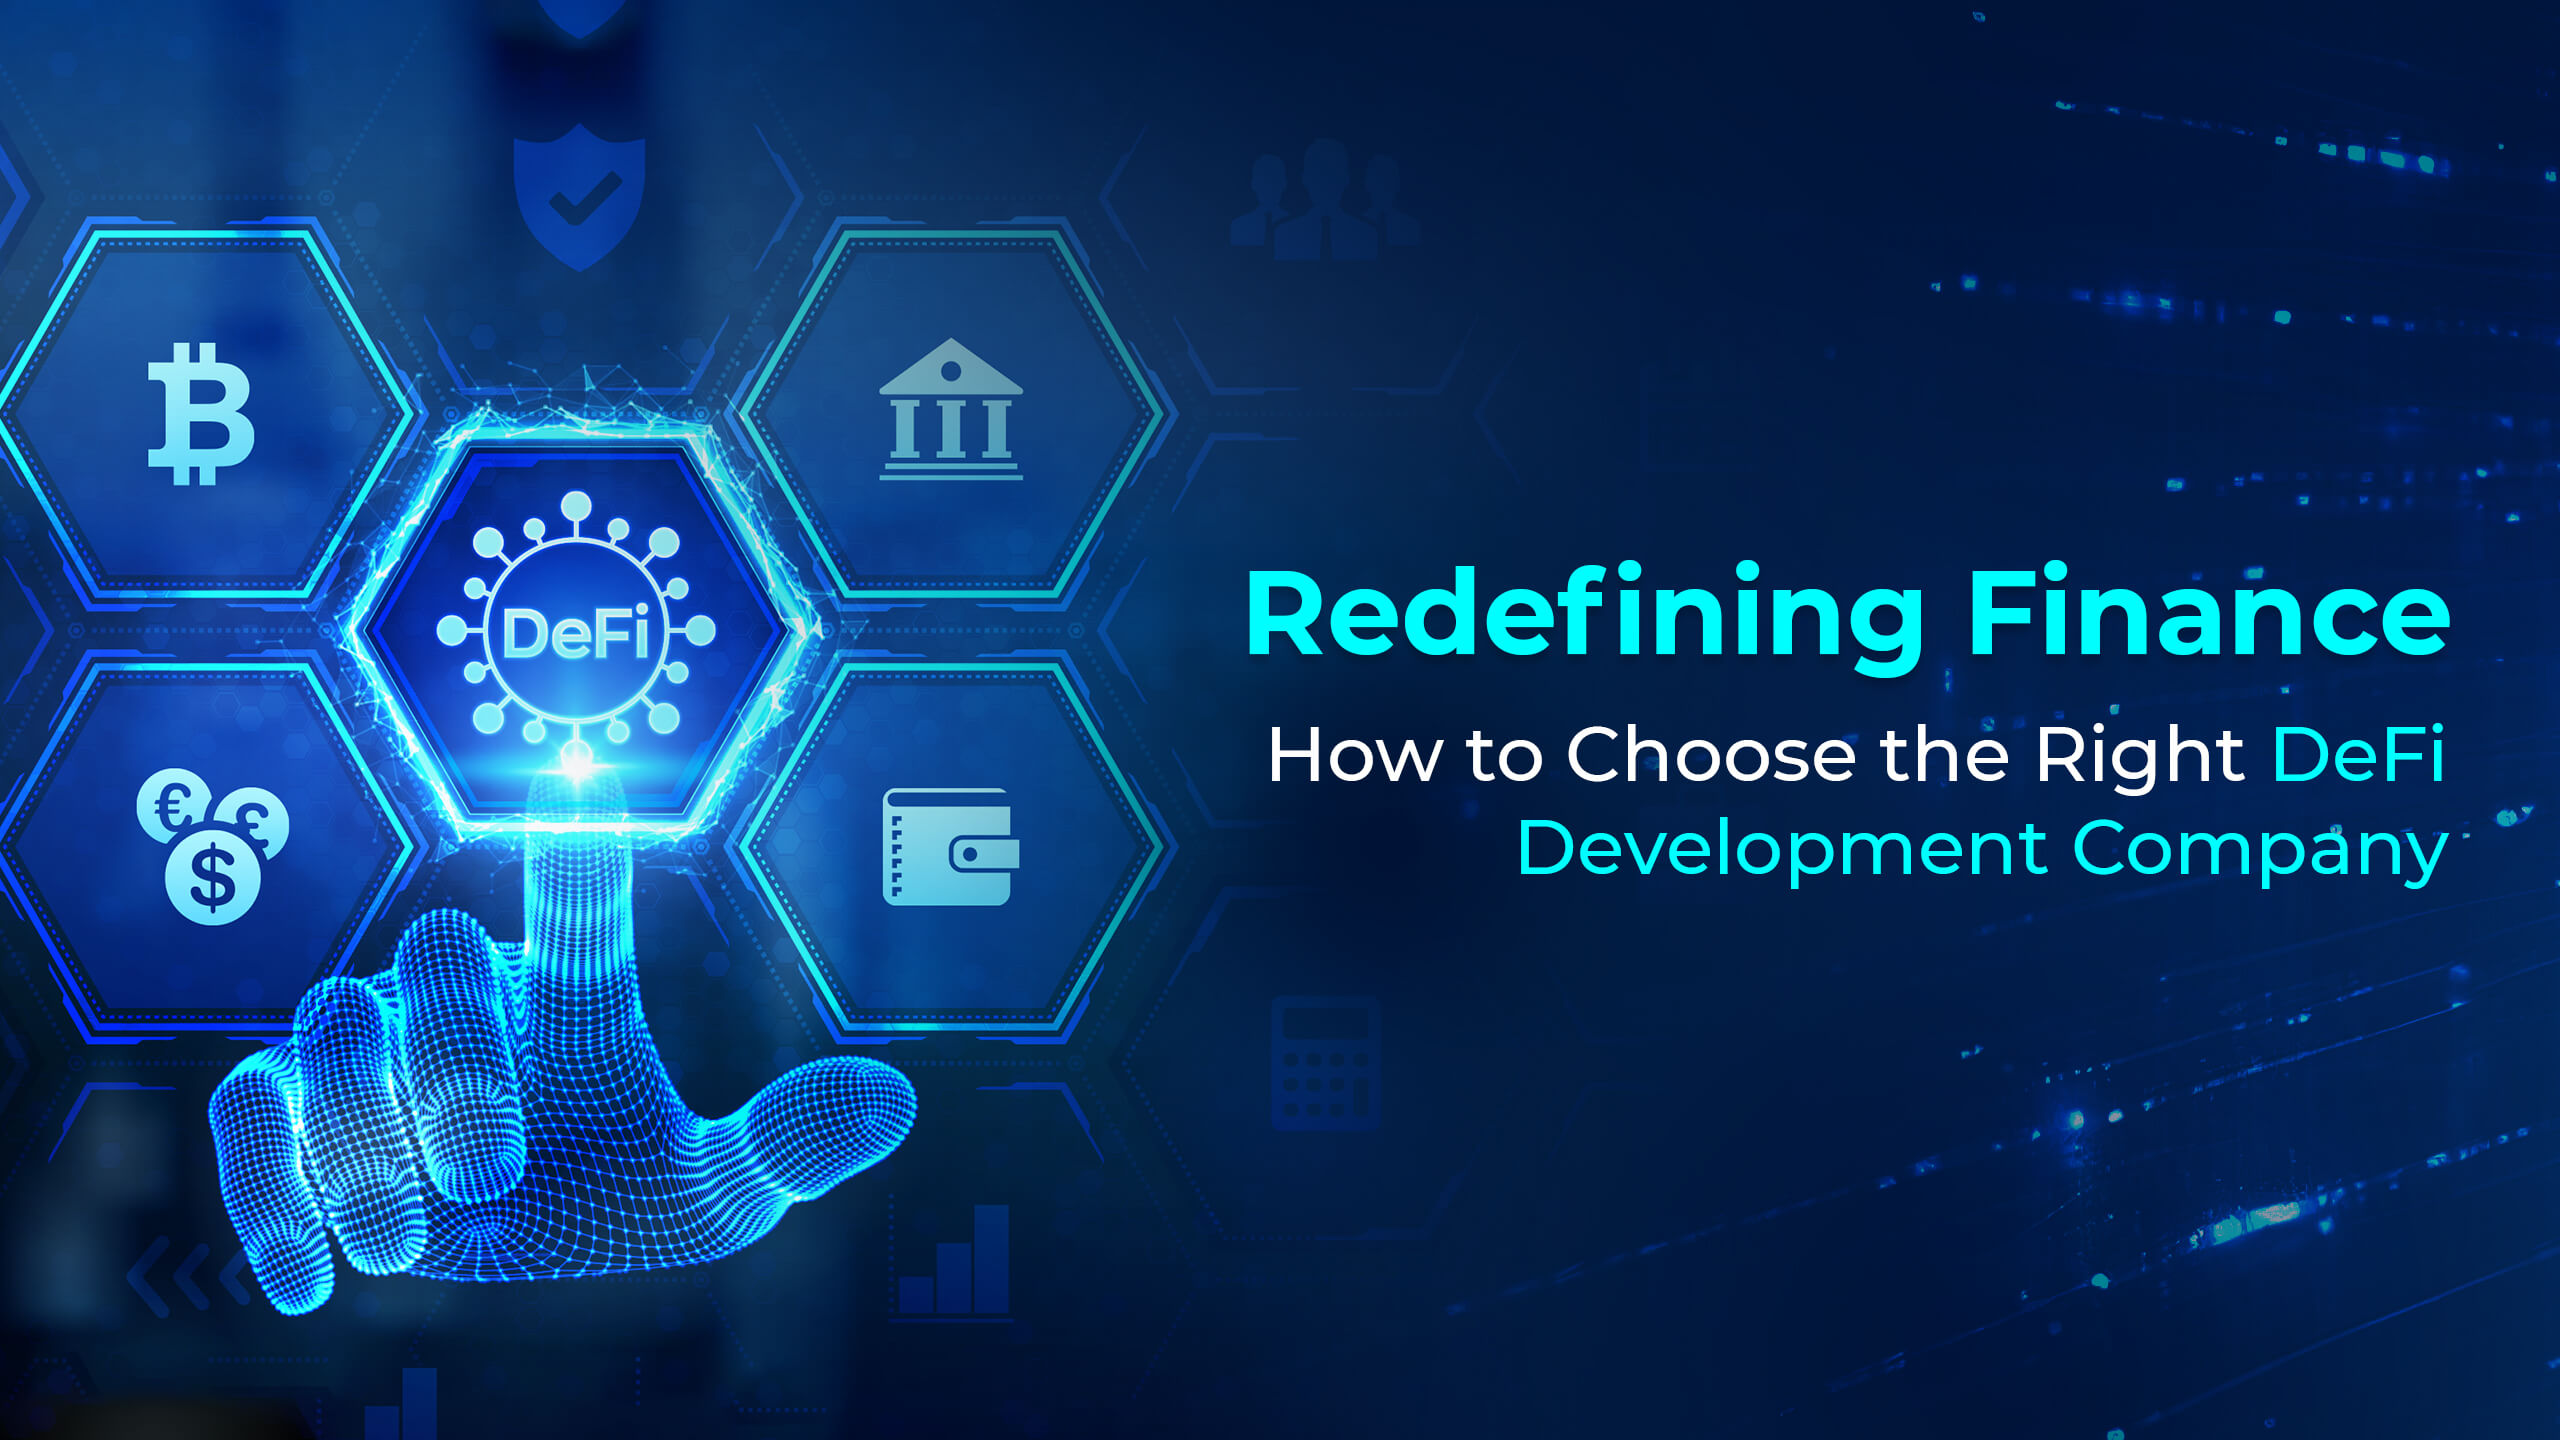 How to Choose the Right DeFi Development Company